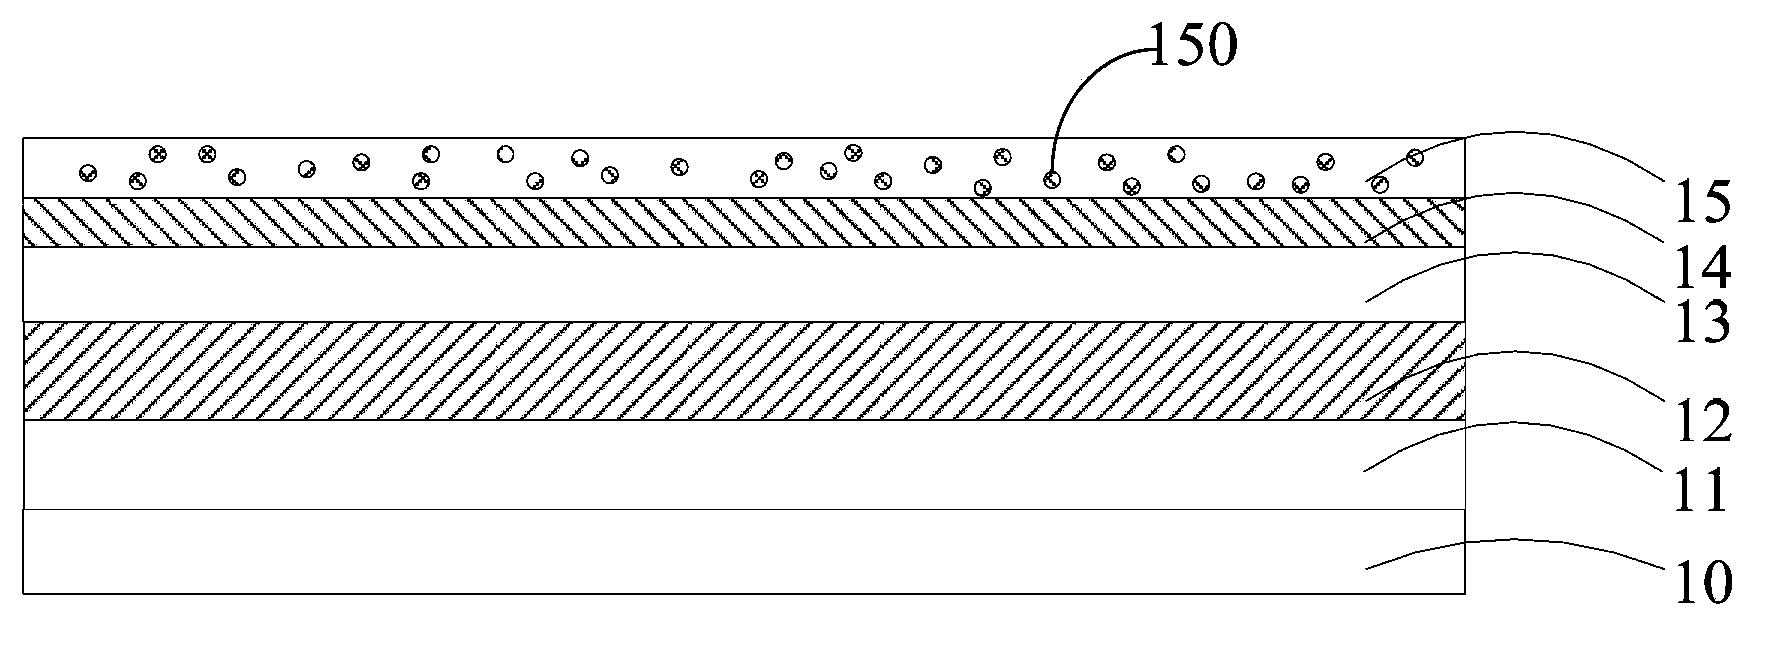 Organic light emission diode device and fabrication method thereof